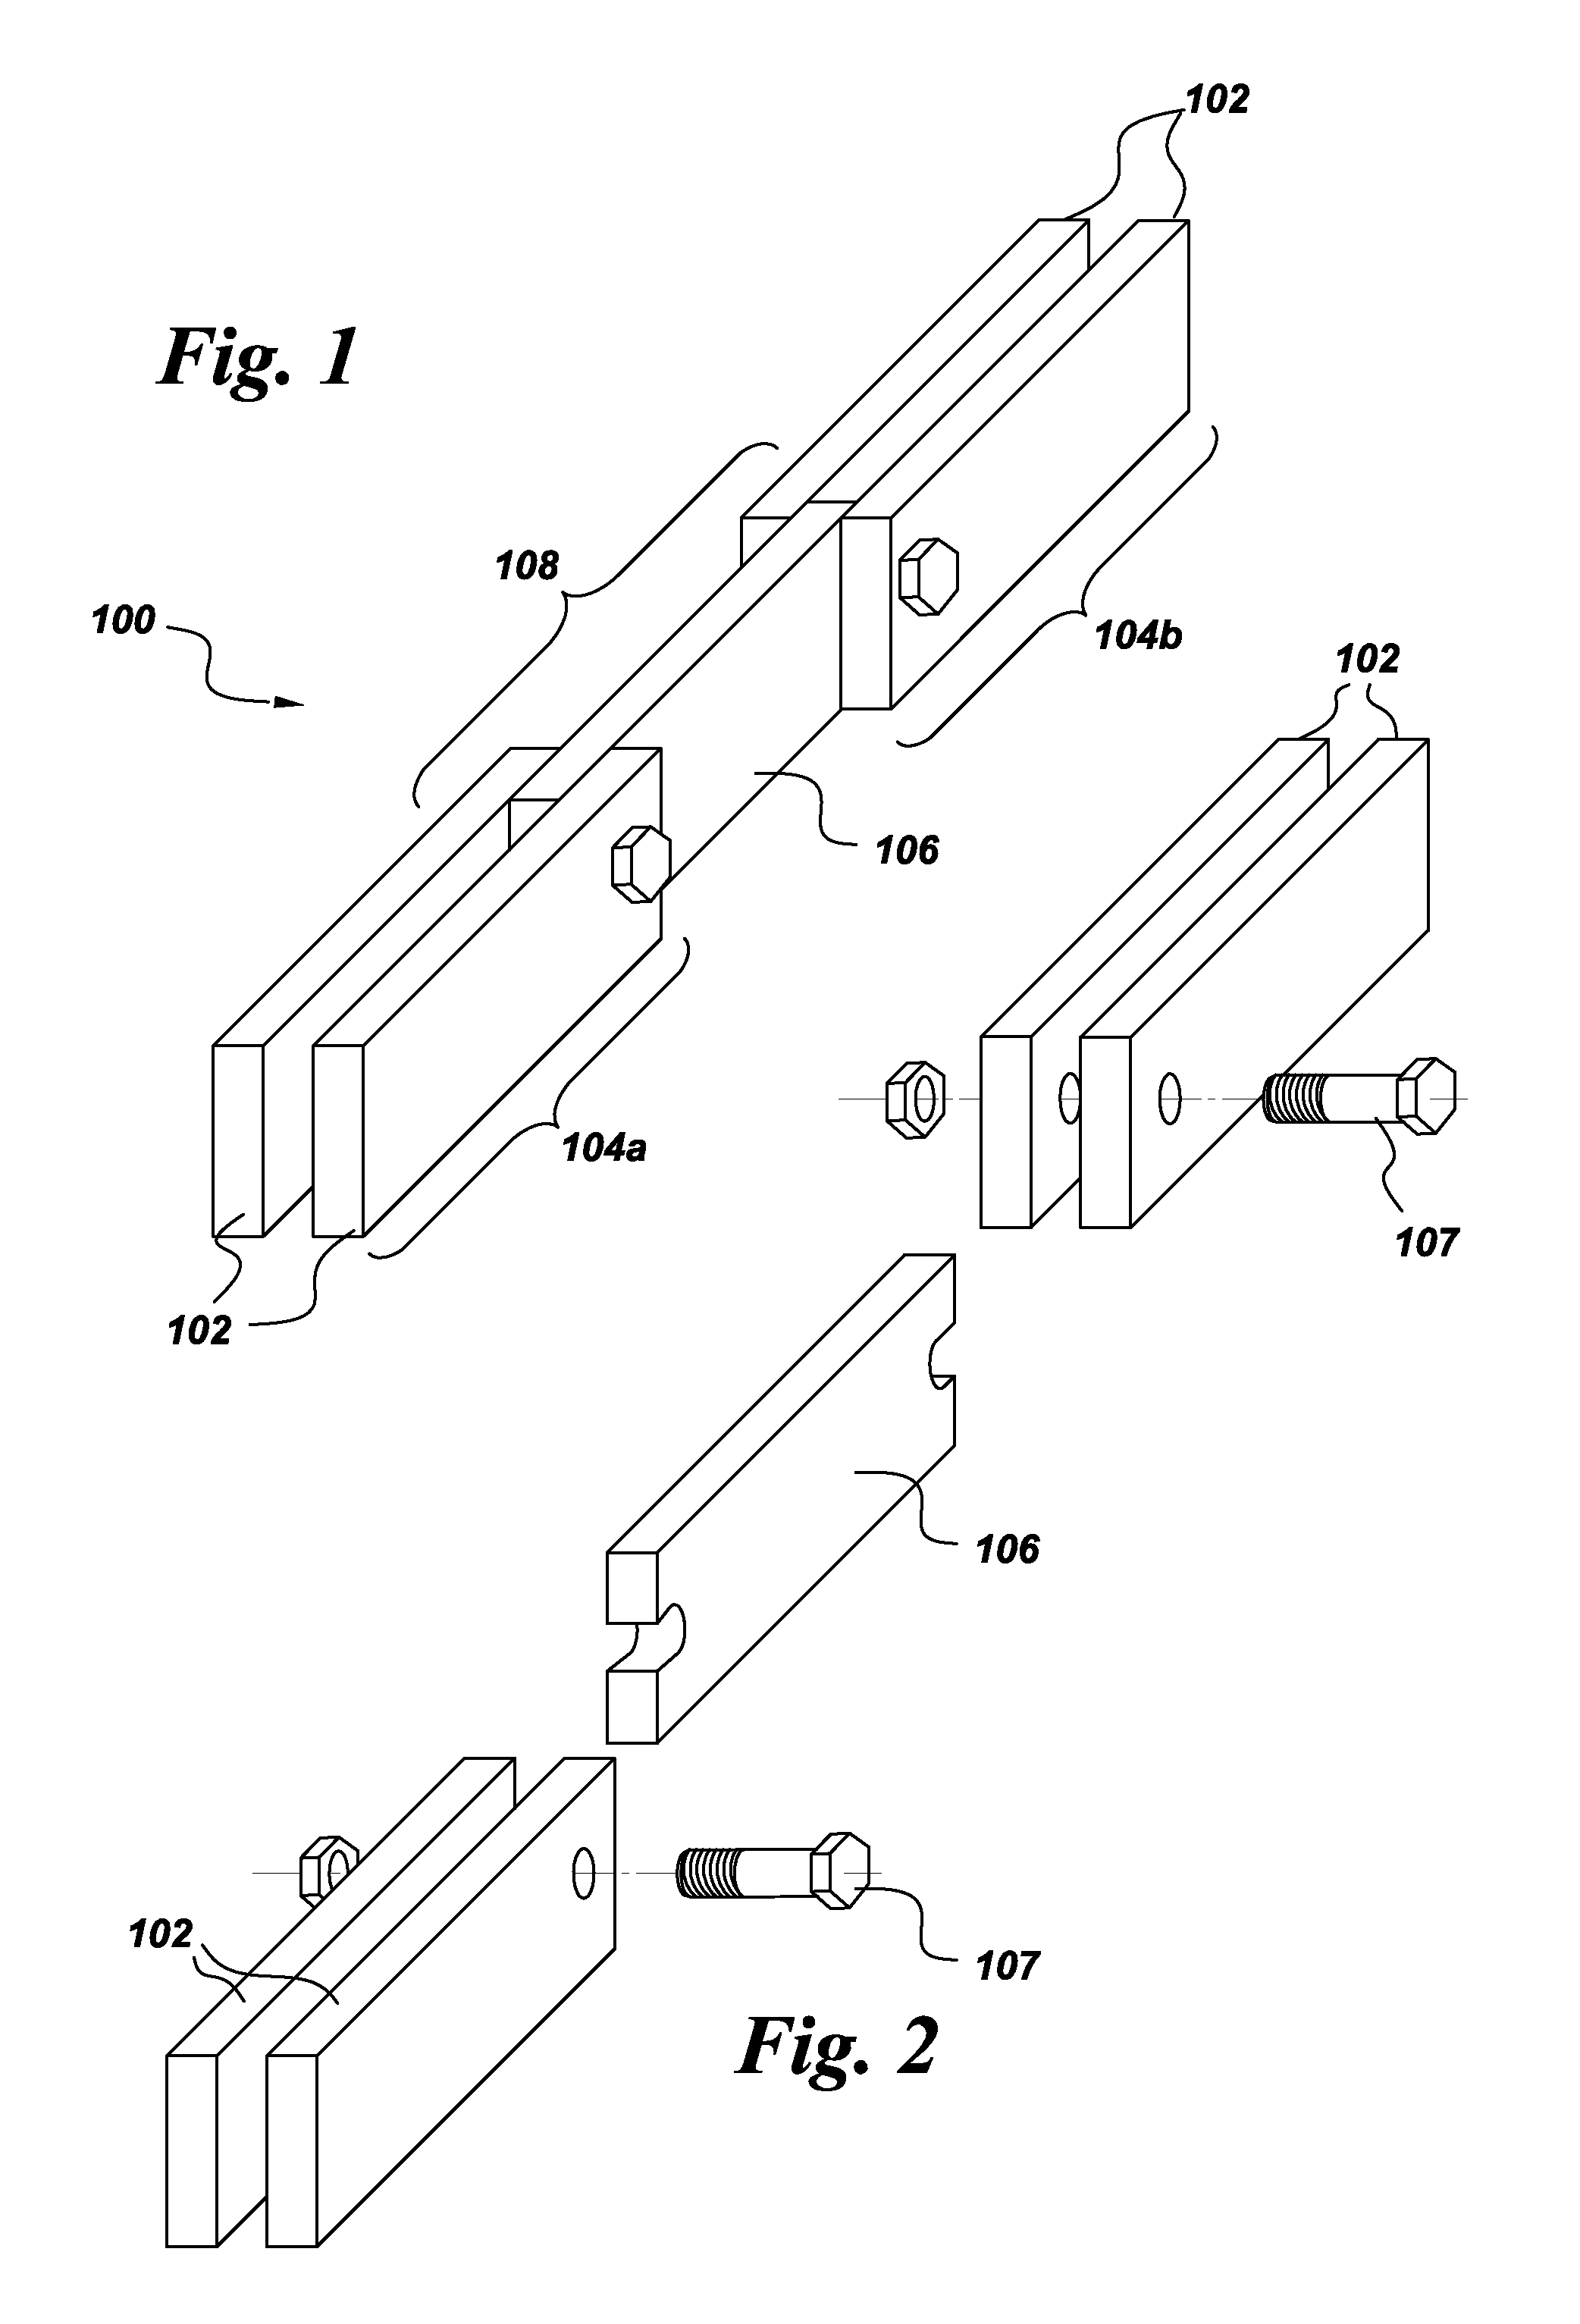 Thermal energy management component and system incorporating the same